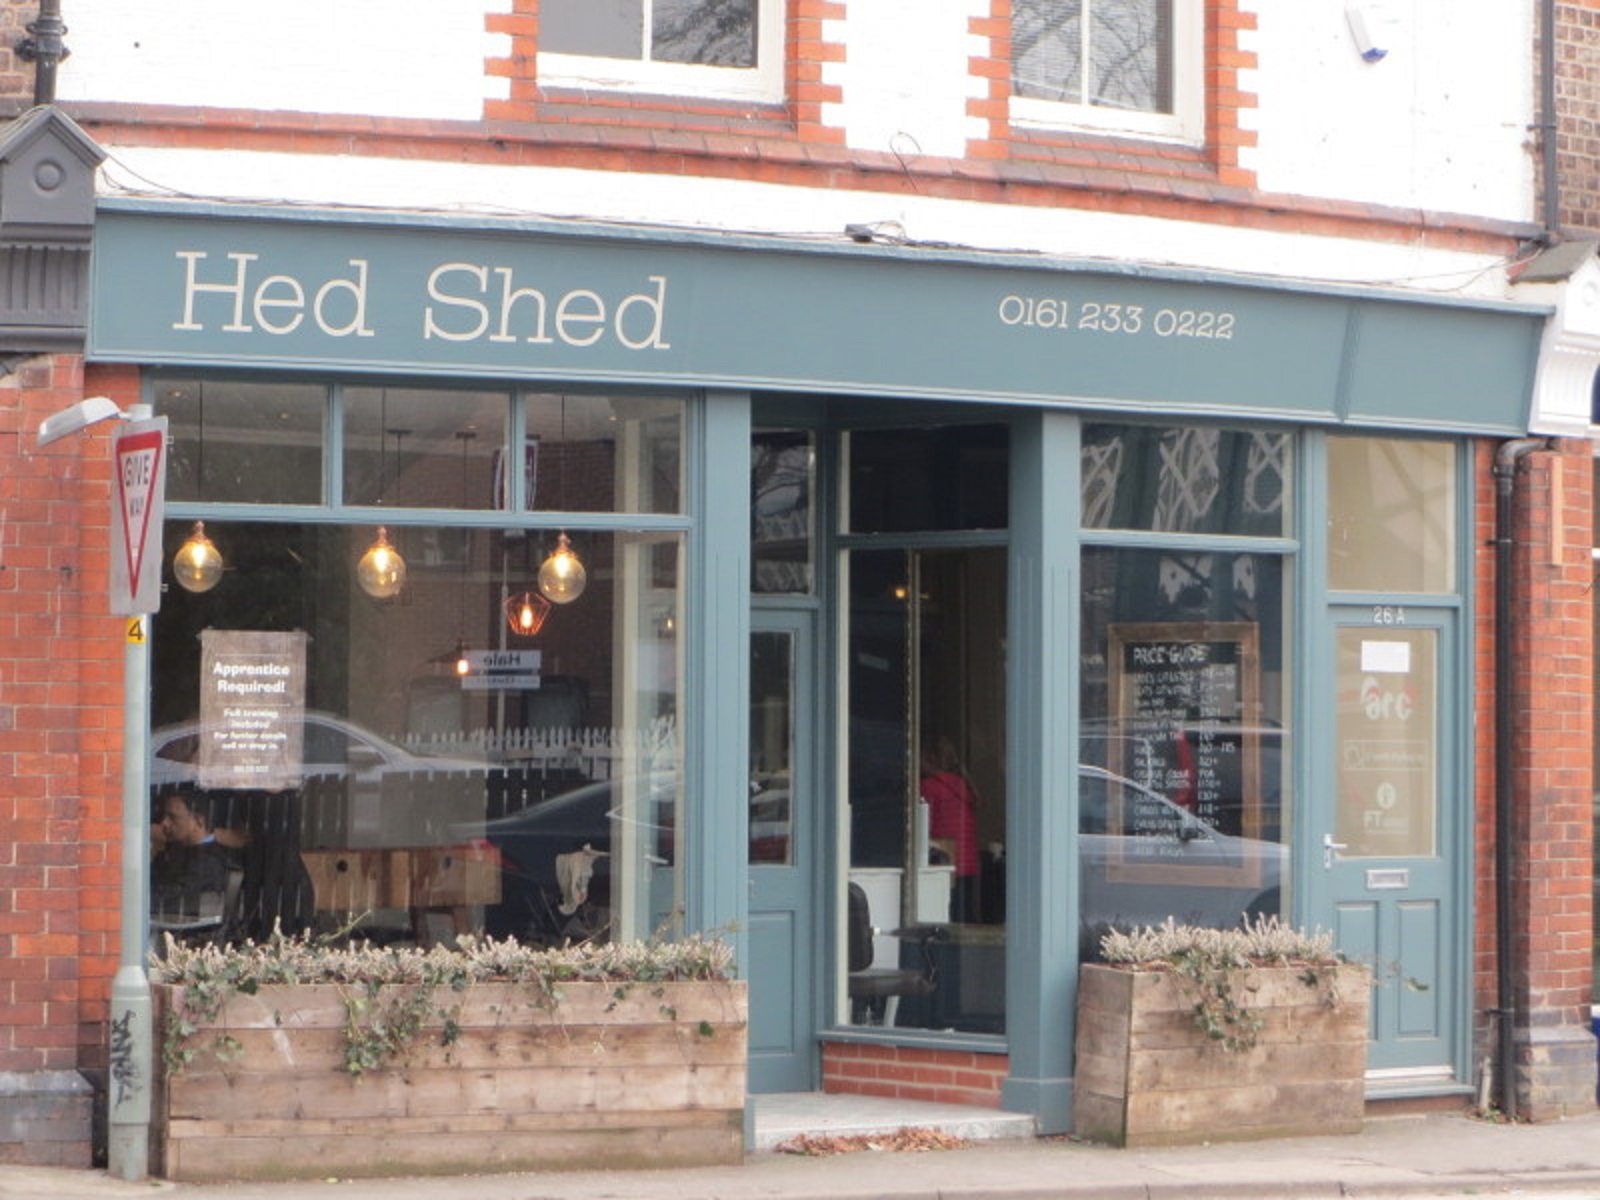 Hed Shed Hair and Beauty Salon in Hale